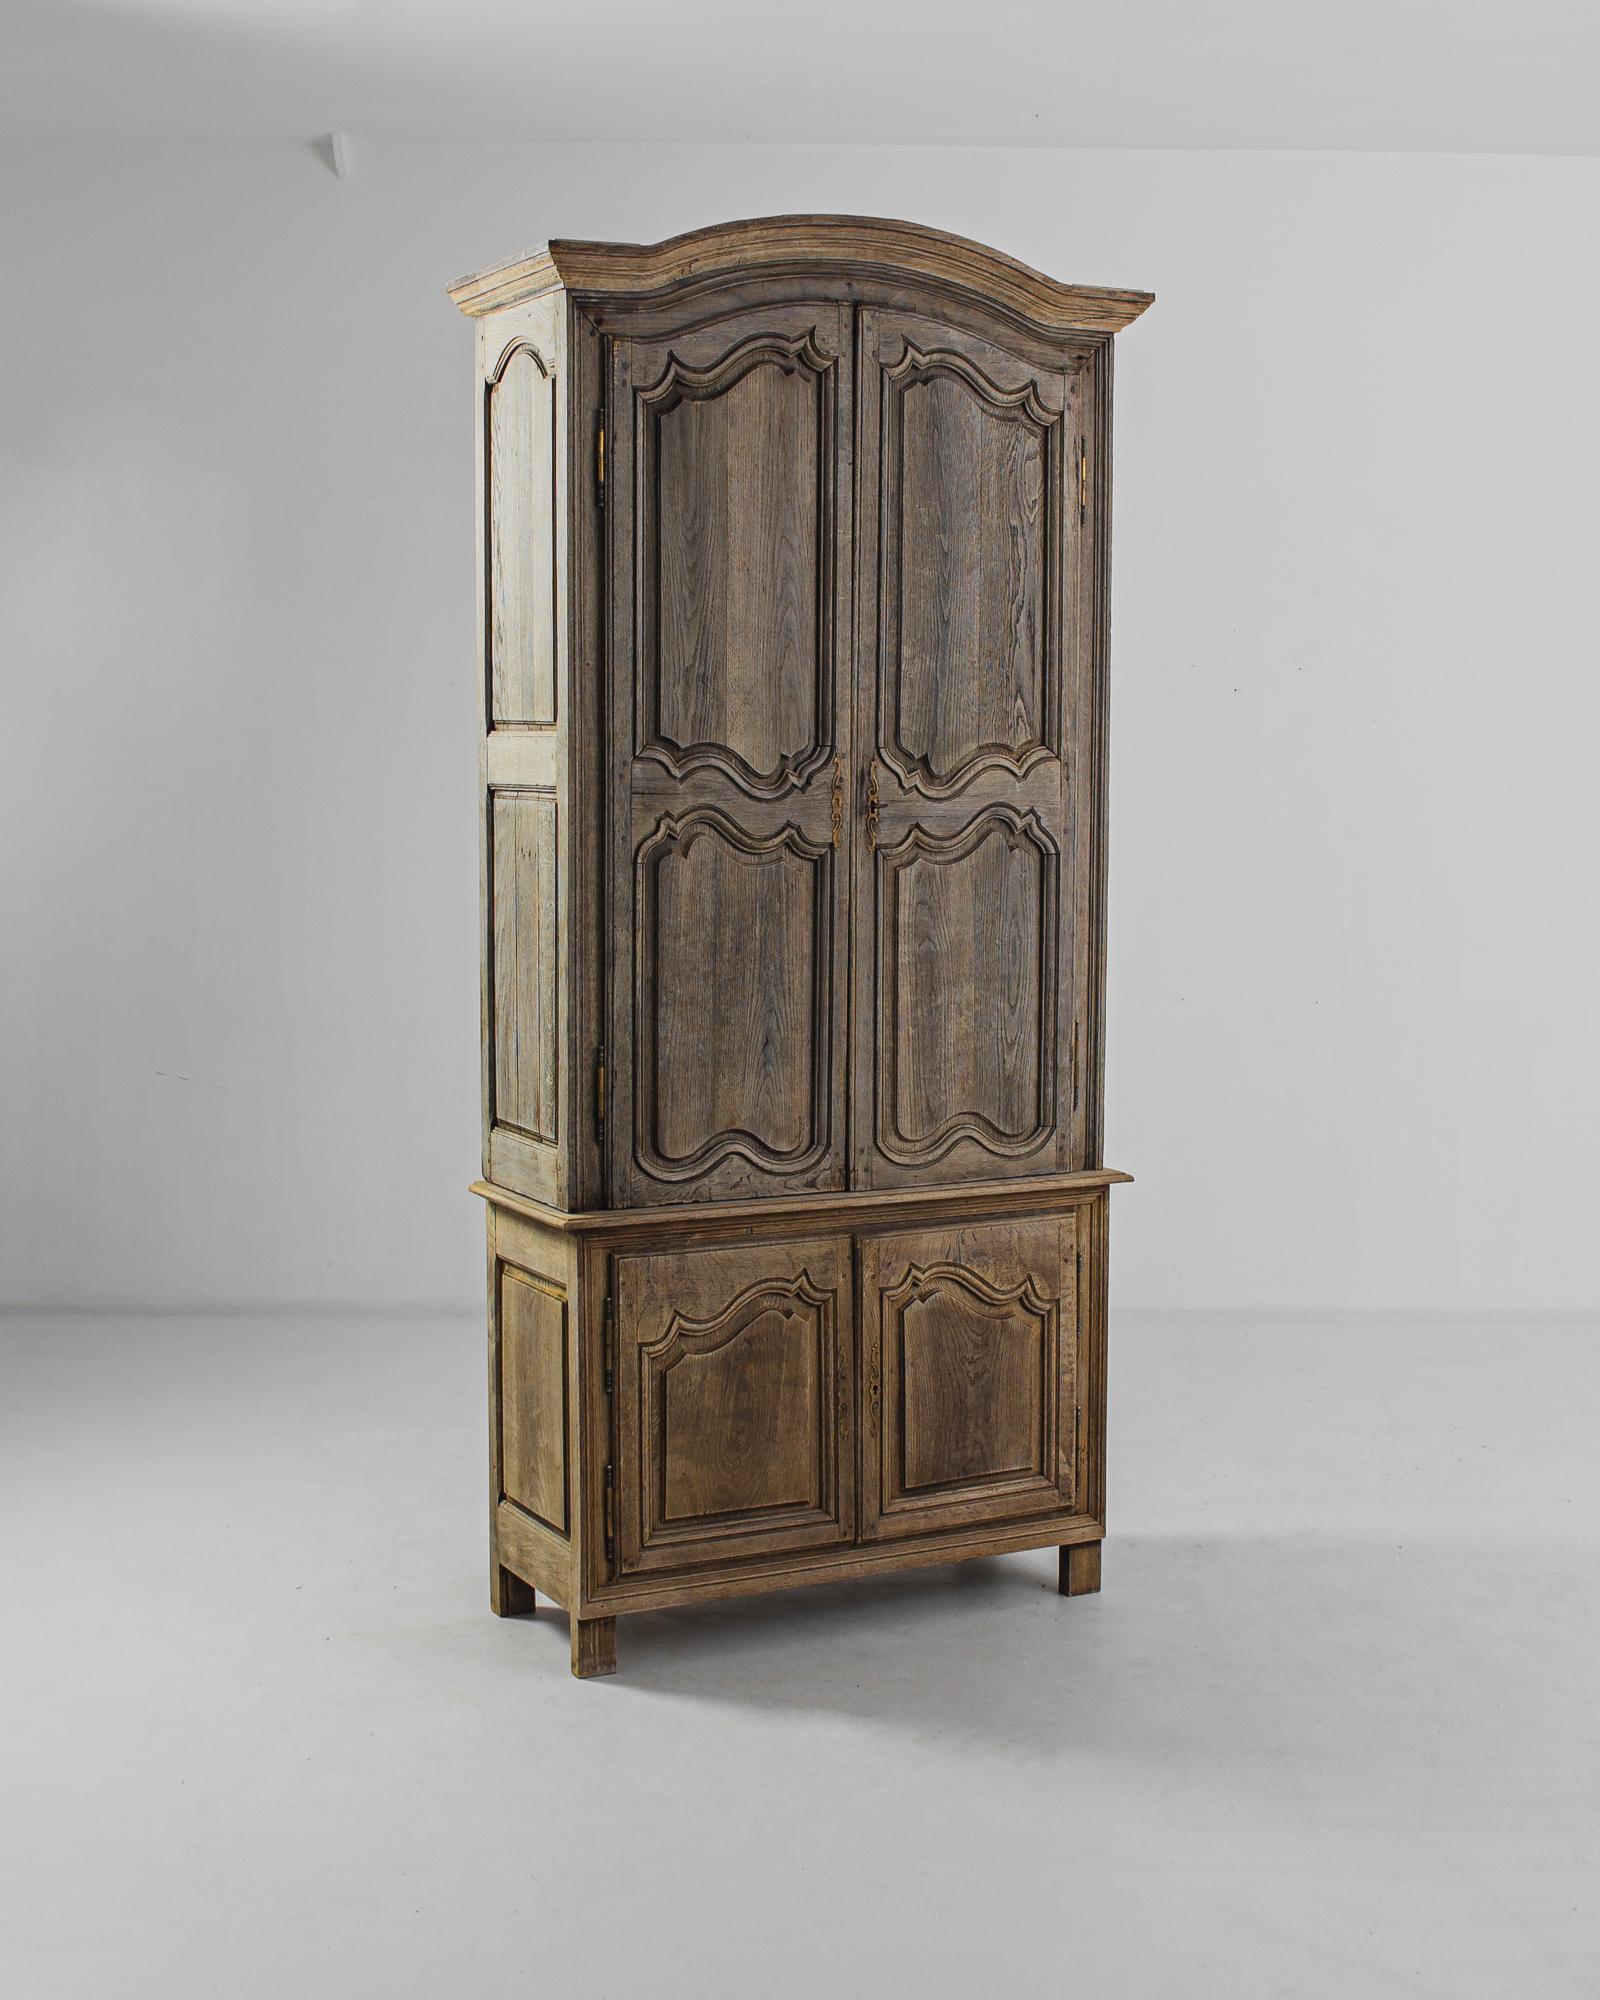 This antique bleached oak cabinet was made in France. The precision of the carved contoured paneling and its smooth finish convey a refined air suffused with rustic warmth. Slightly elevated, it features four shelves in the compartment above and two